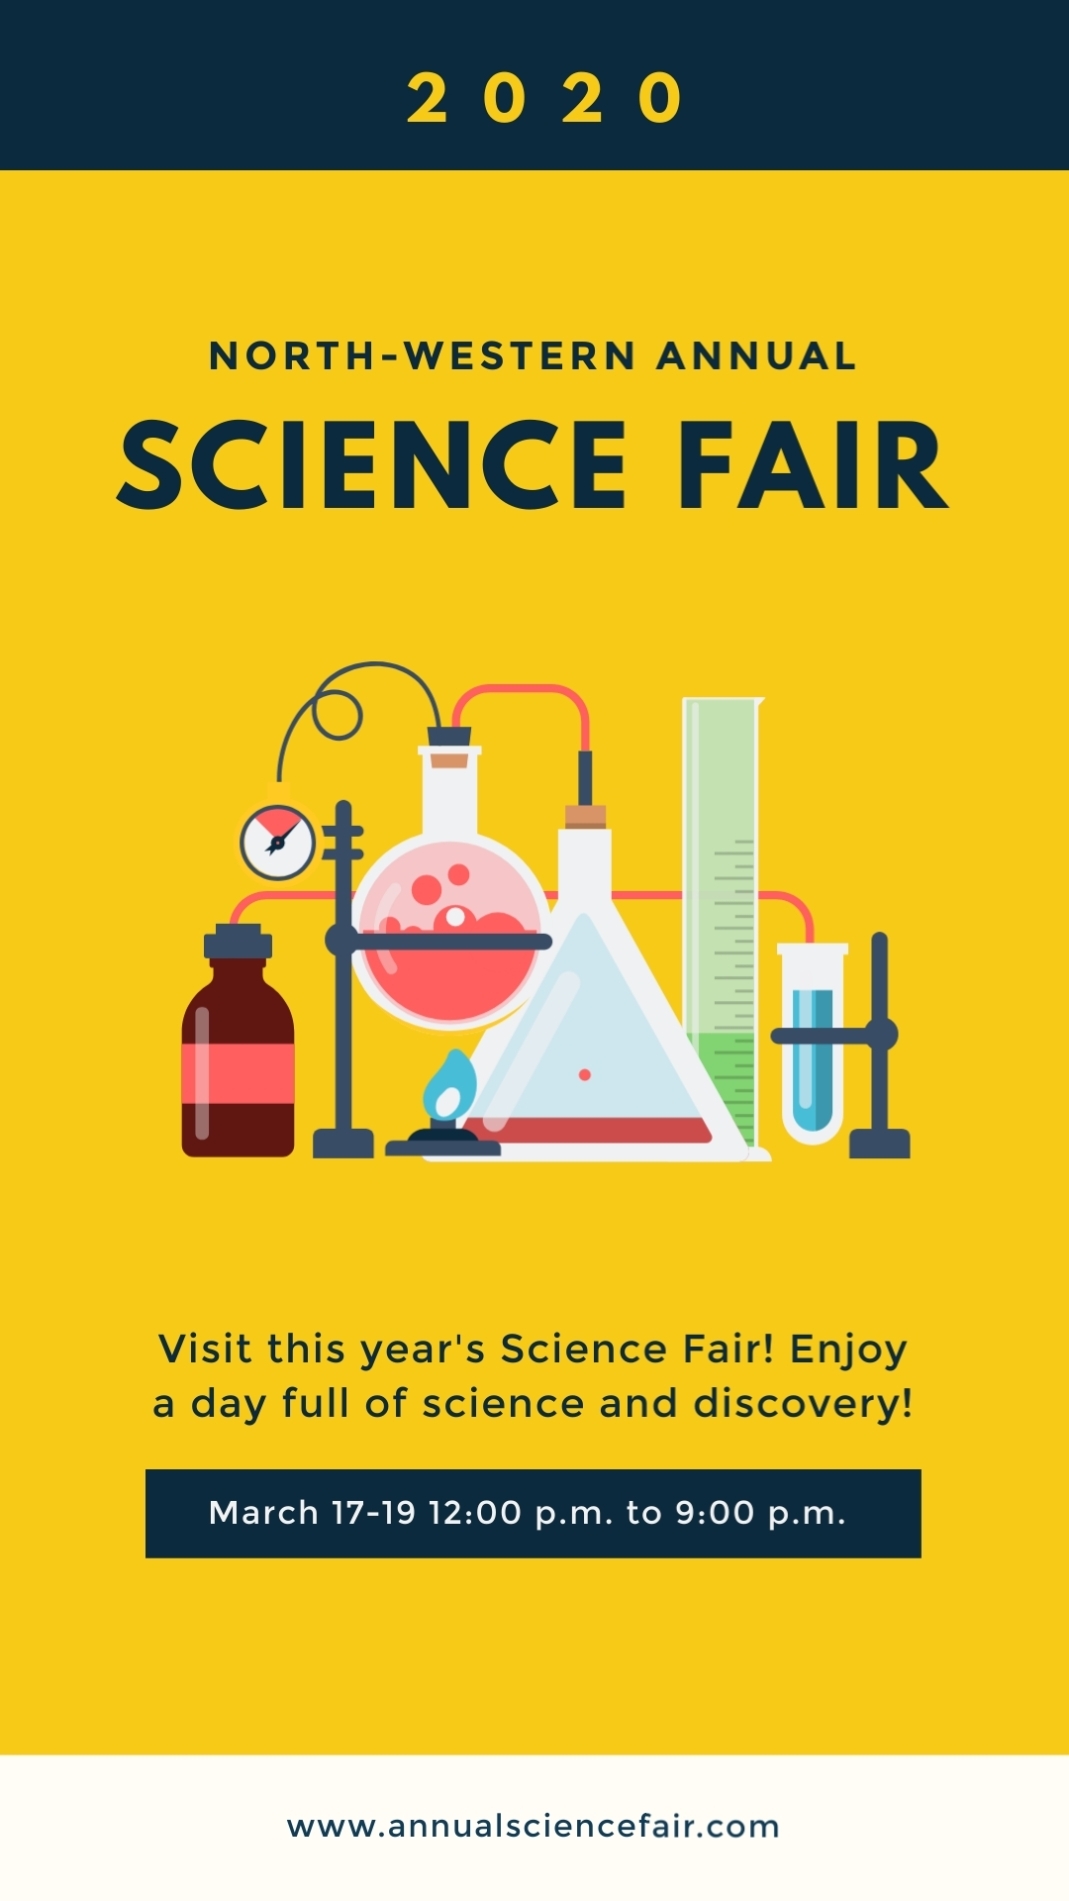 Science Fair Vertical Template | Visme within Science Fair Labels Templates